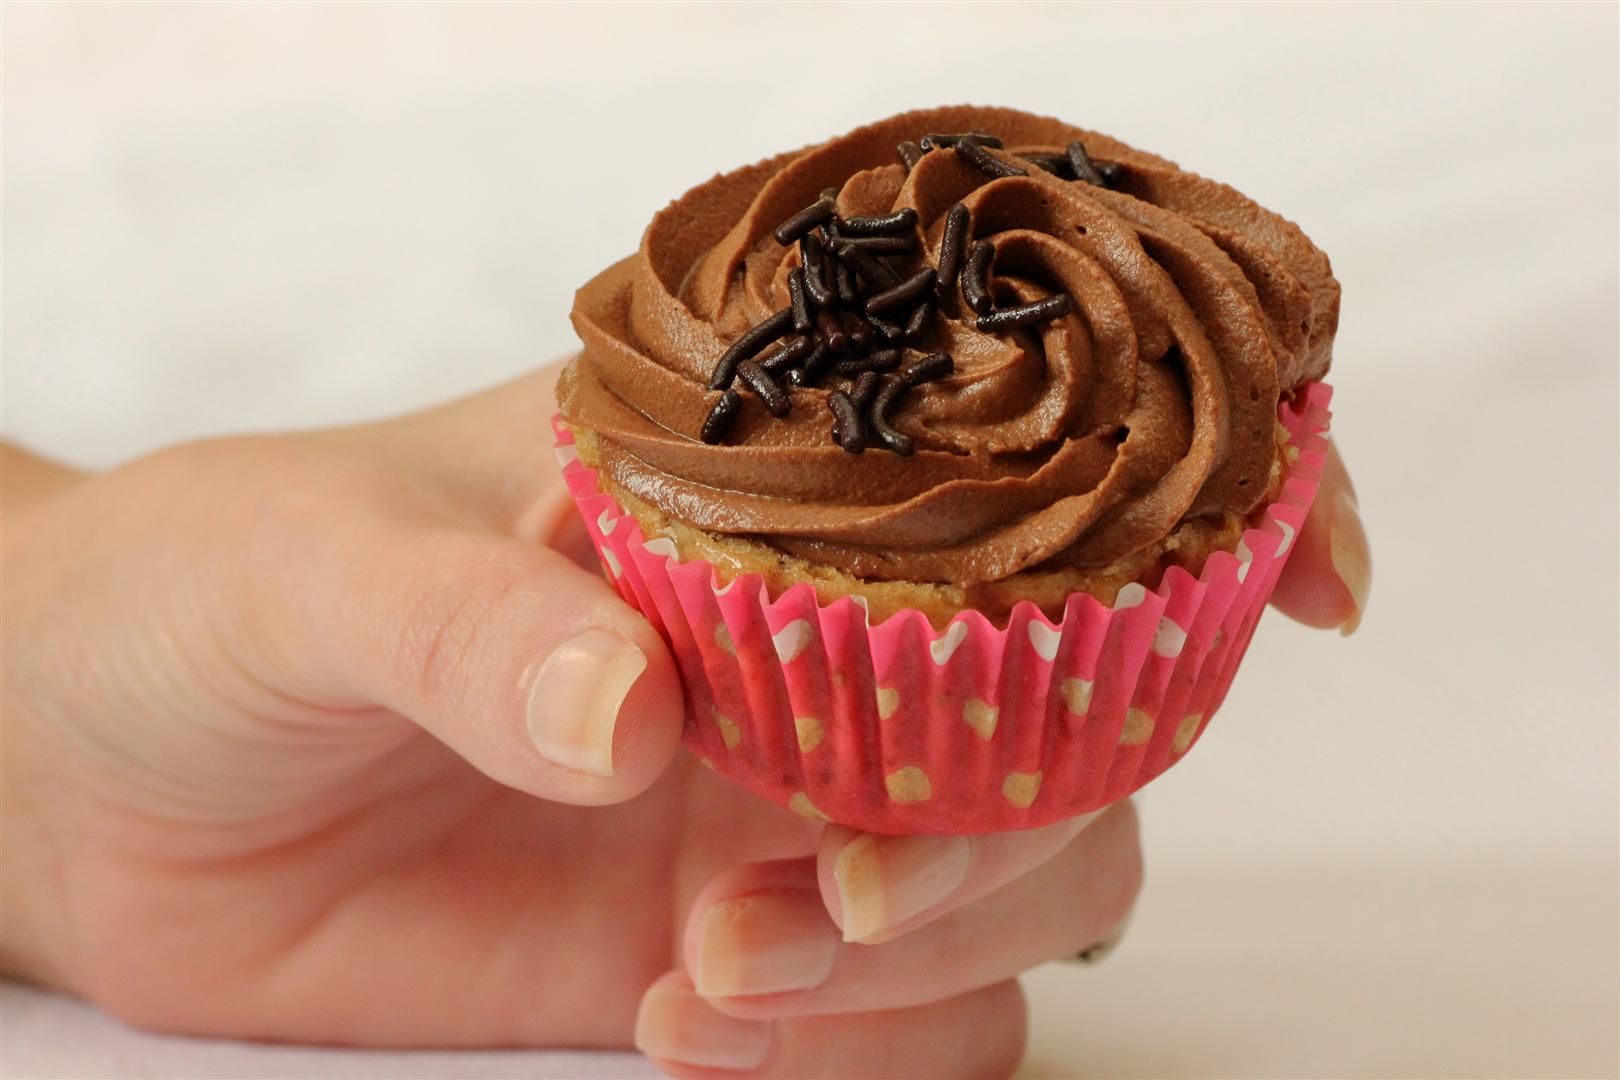 Chestnut Cupcakes with Coffee Chocolate Cream